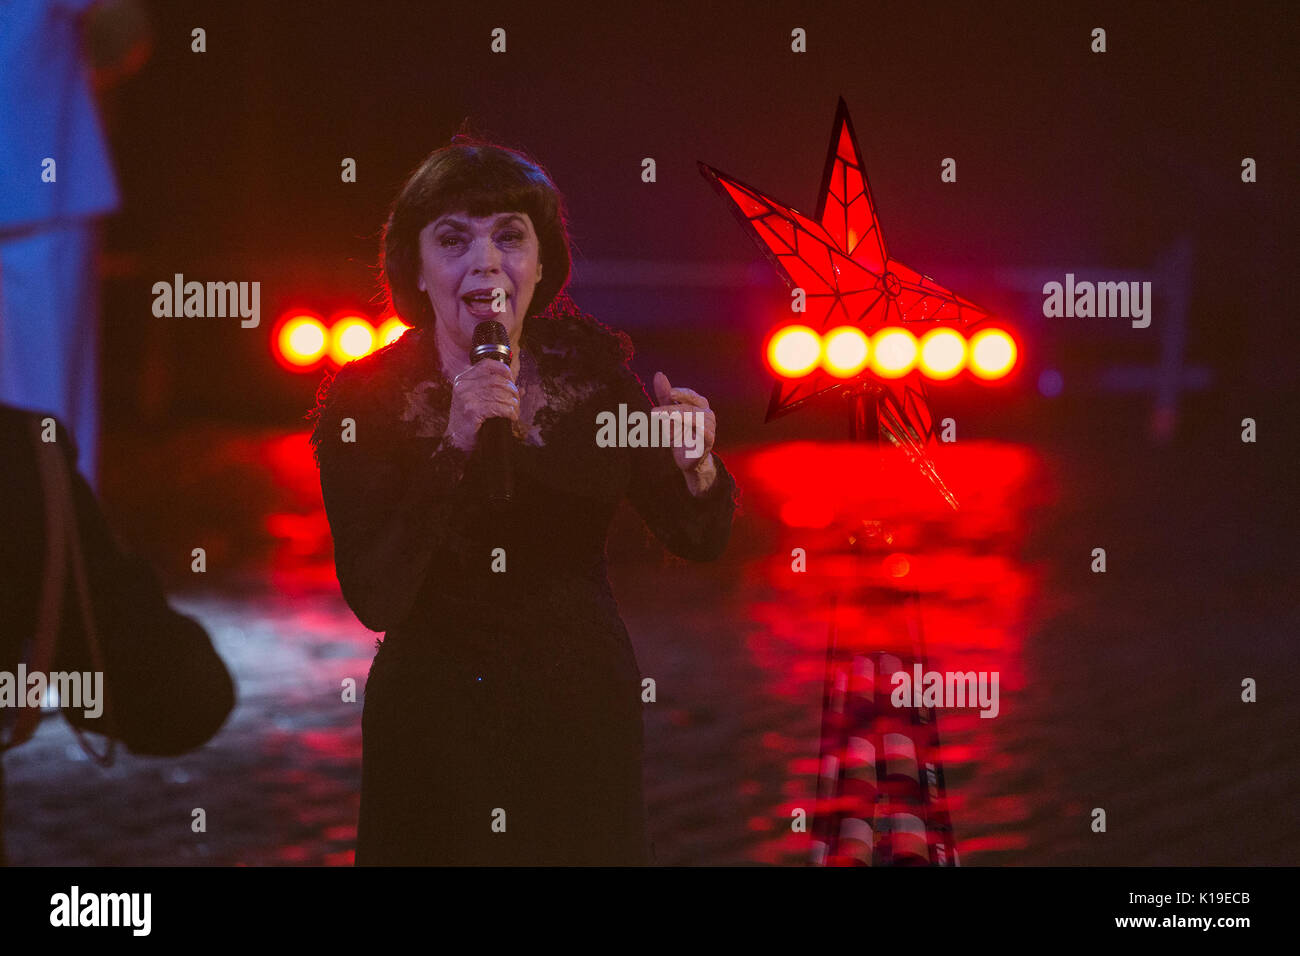 Moscow, Russia. 26th Aug, 2017. A multi-exposure photo shows French singer Mireille Mathieu performing during the 'Spasskaya Tower' International Military Music Festival in Moscow, Russia, on Aug. 26, 2017. The 'Spasskaya Tower' International Military Music Festival opened on Red Square in Moscow on Saturday. Credit: Bai Xueqi/Xinhua/Alamy Live News Stock Photo